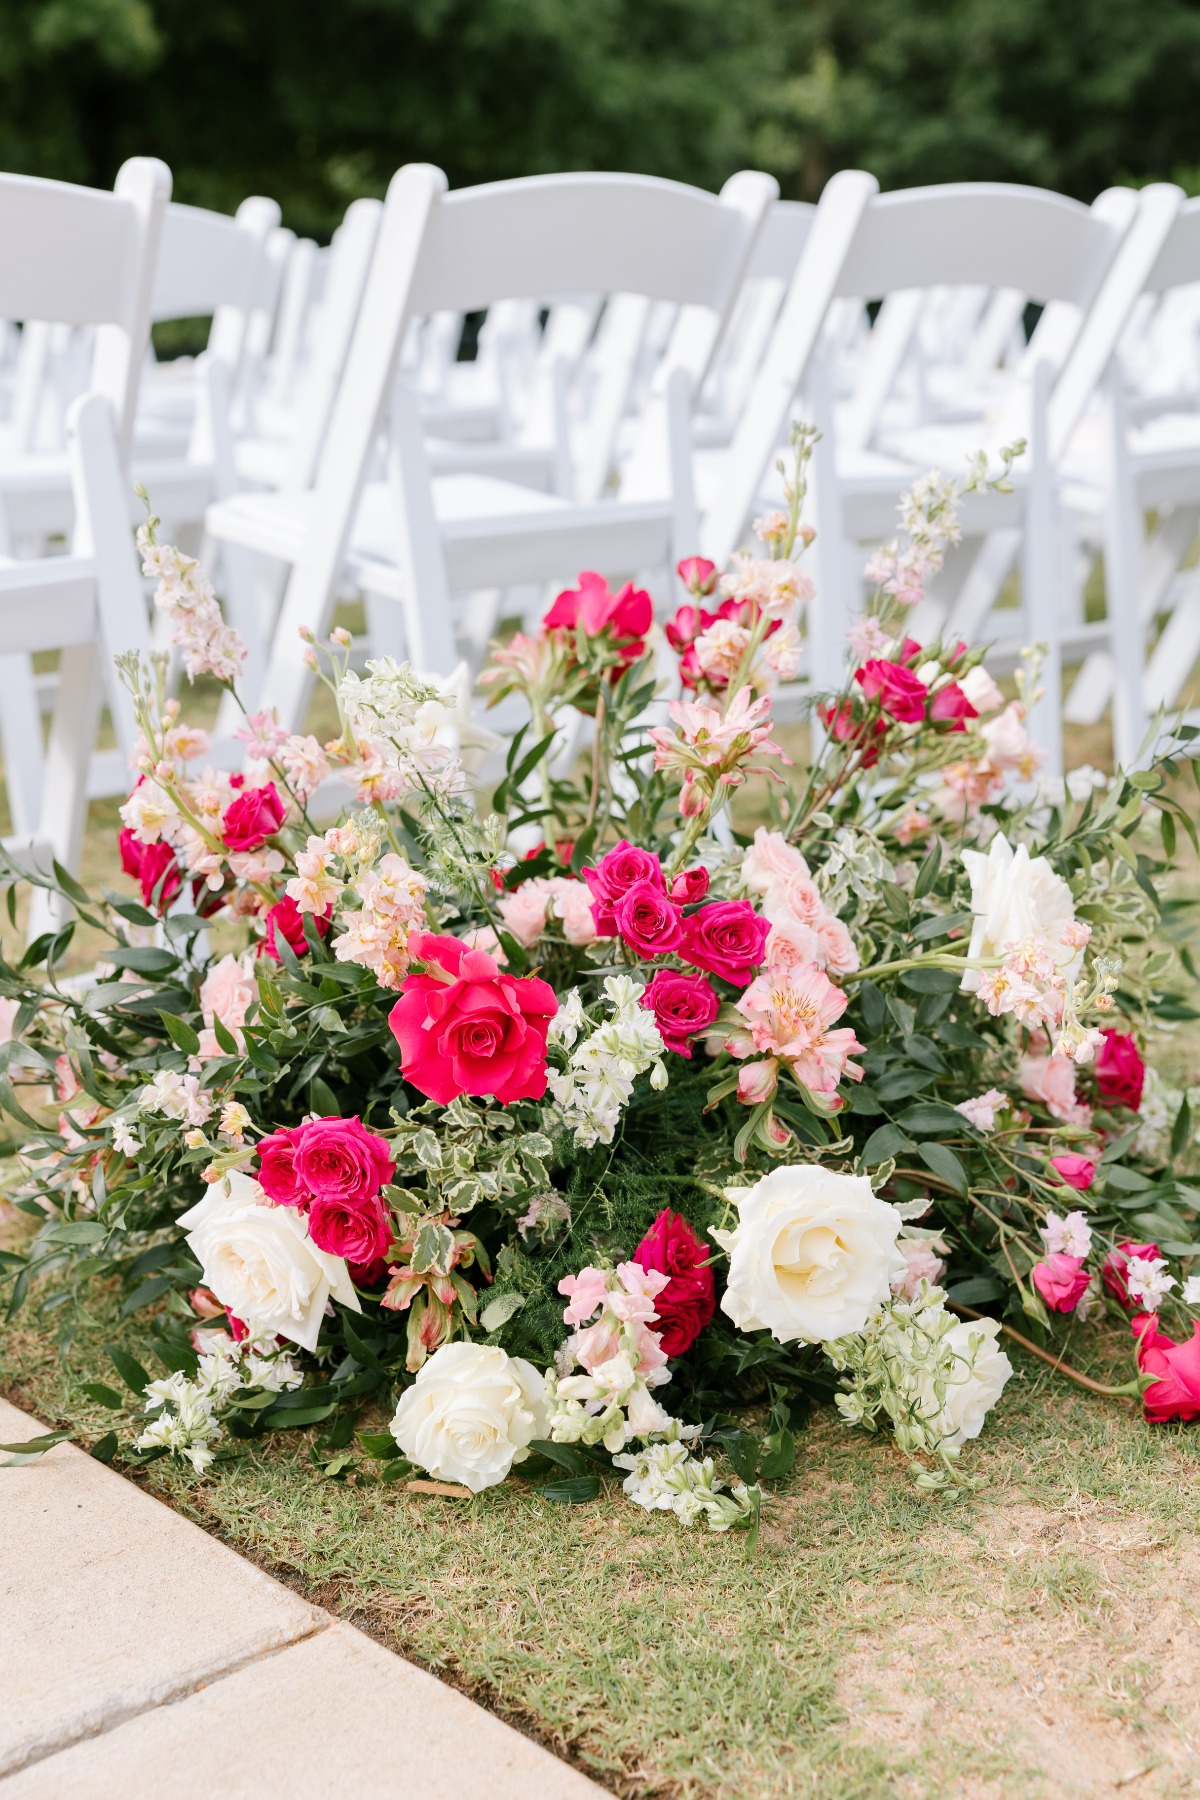 Hot pink and white floral centerpiece for ceremony aisle 